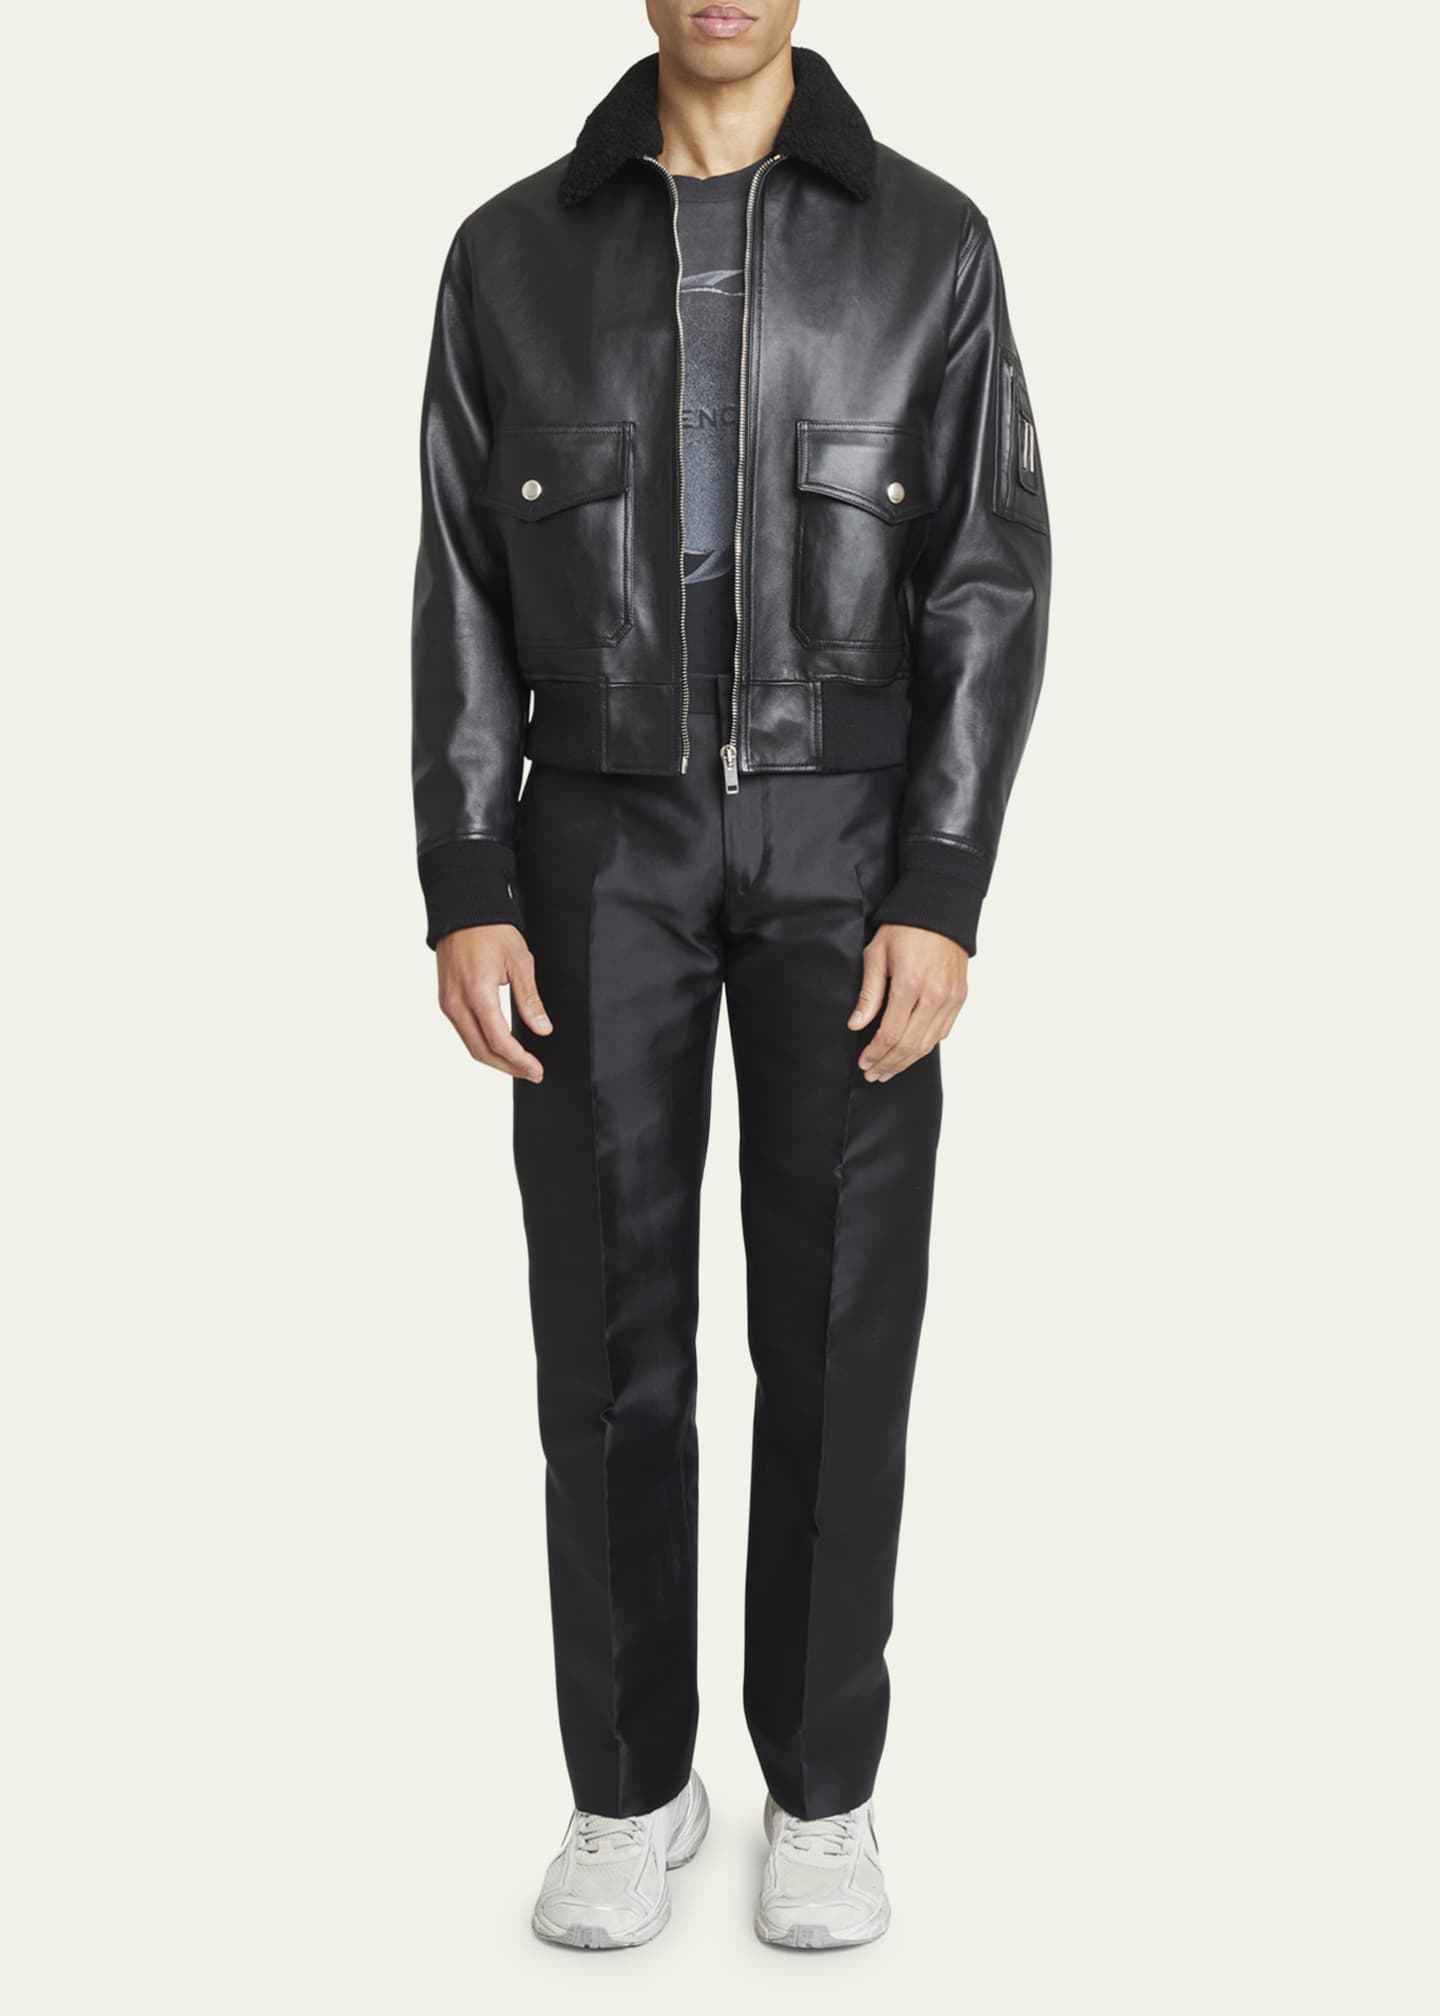 Givenchy Men's Leather Aviator Jacket with Shearling Collar - Bergdorf ...